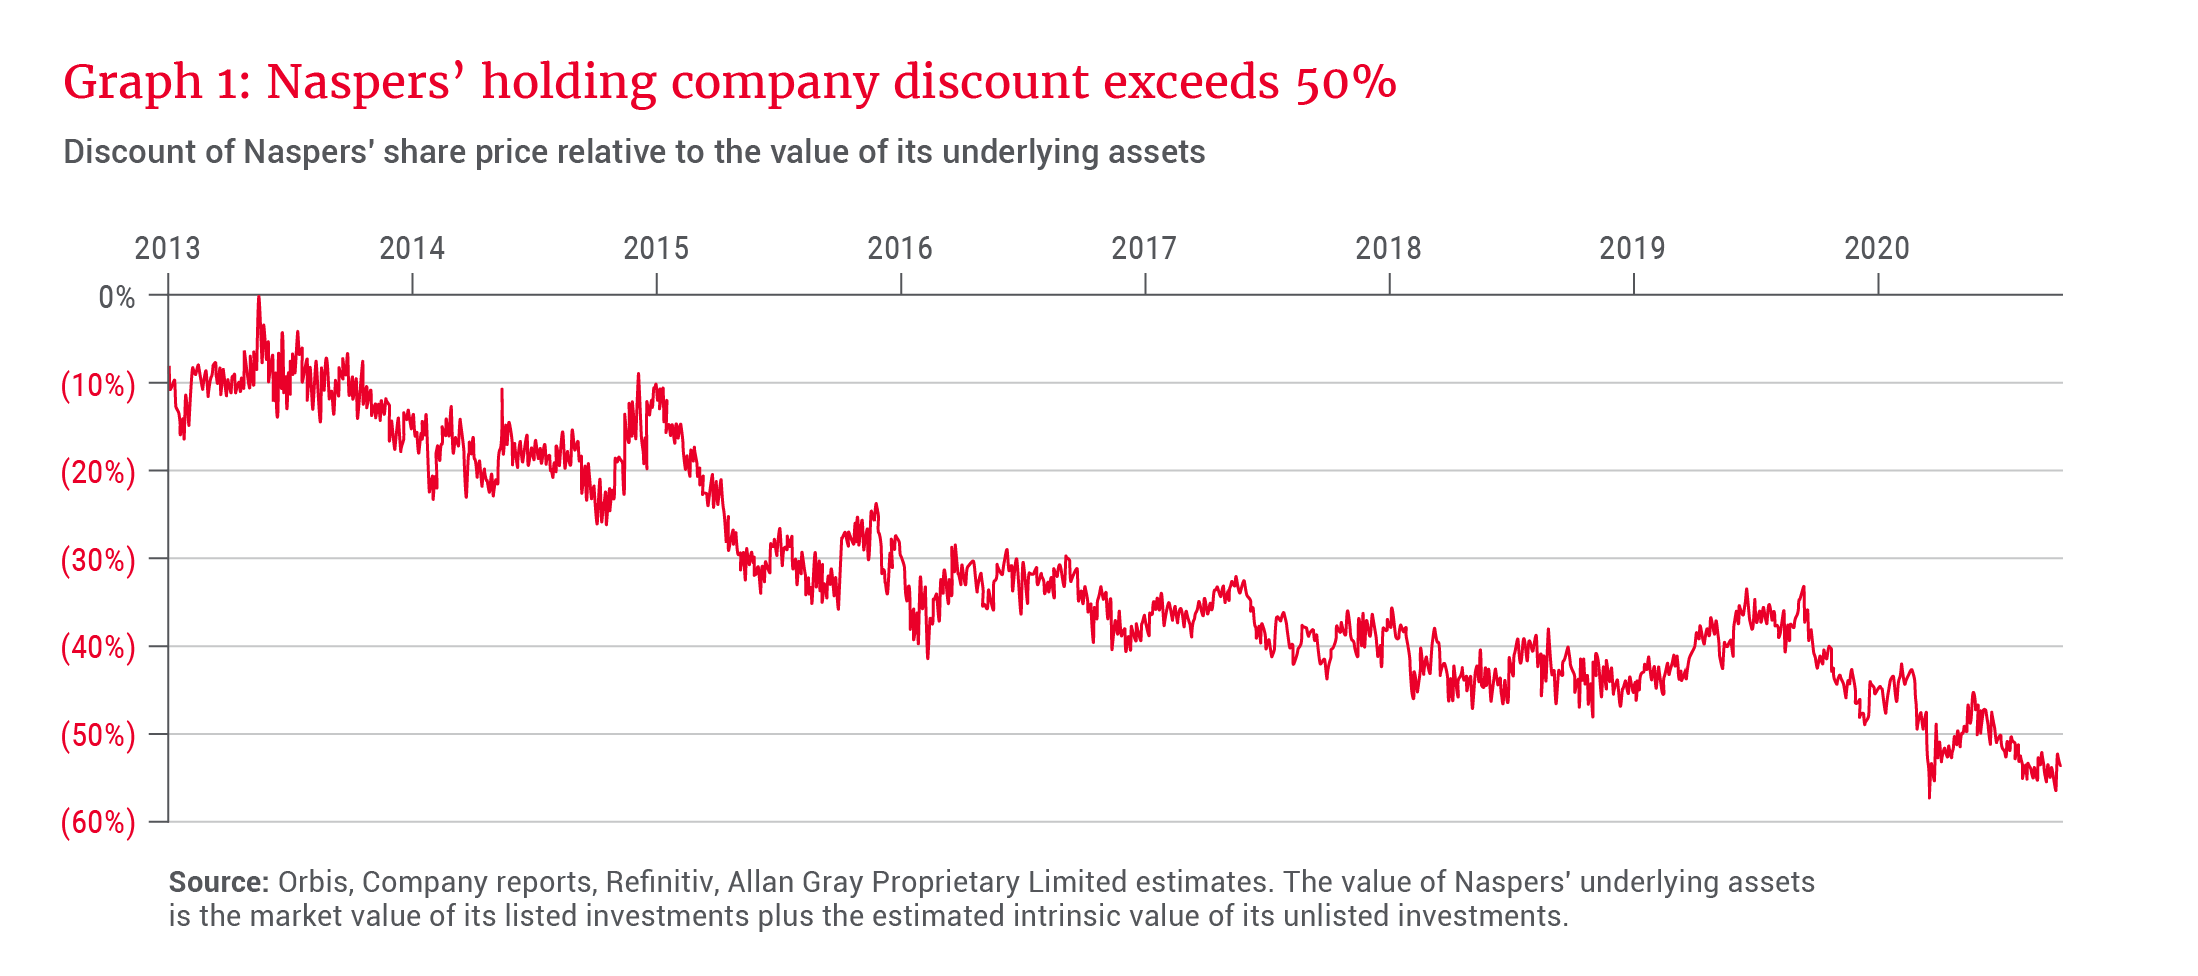 Discount of Naspers' share price relative to the value of its underlying assets - Allan Gray